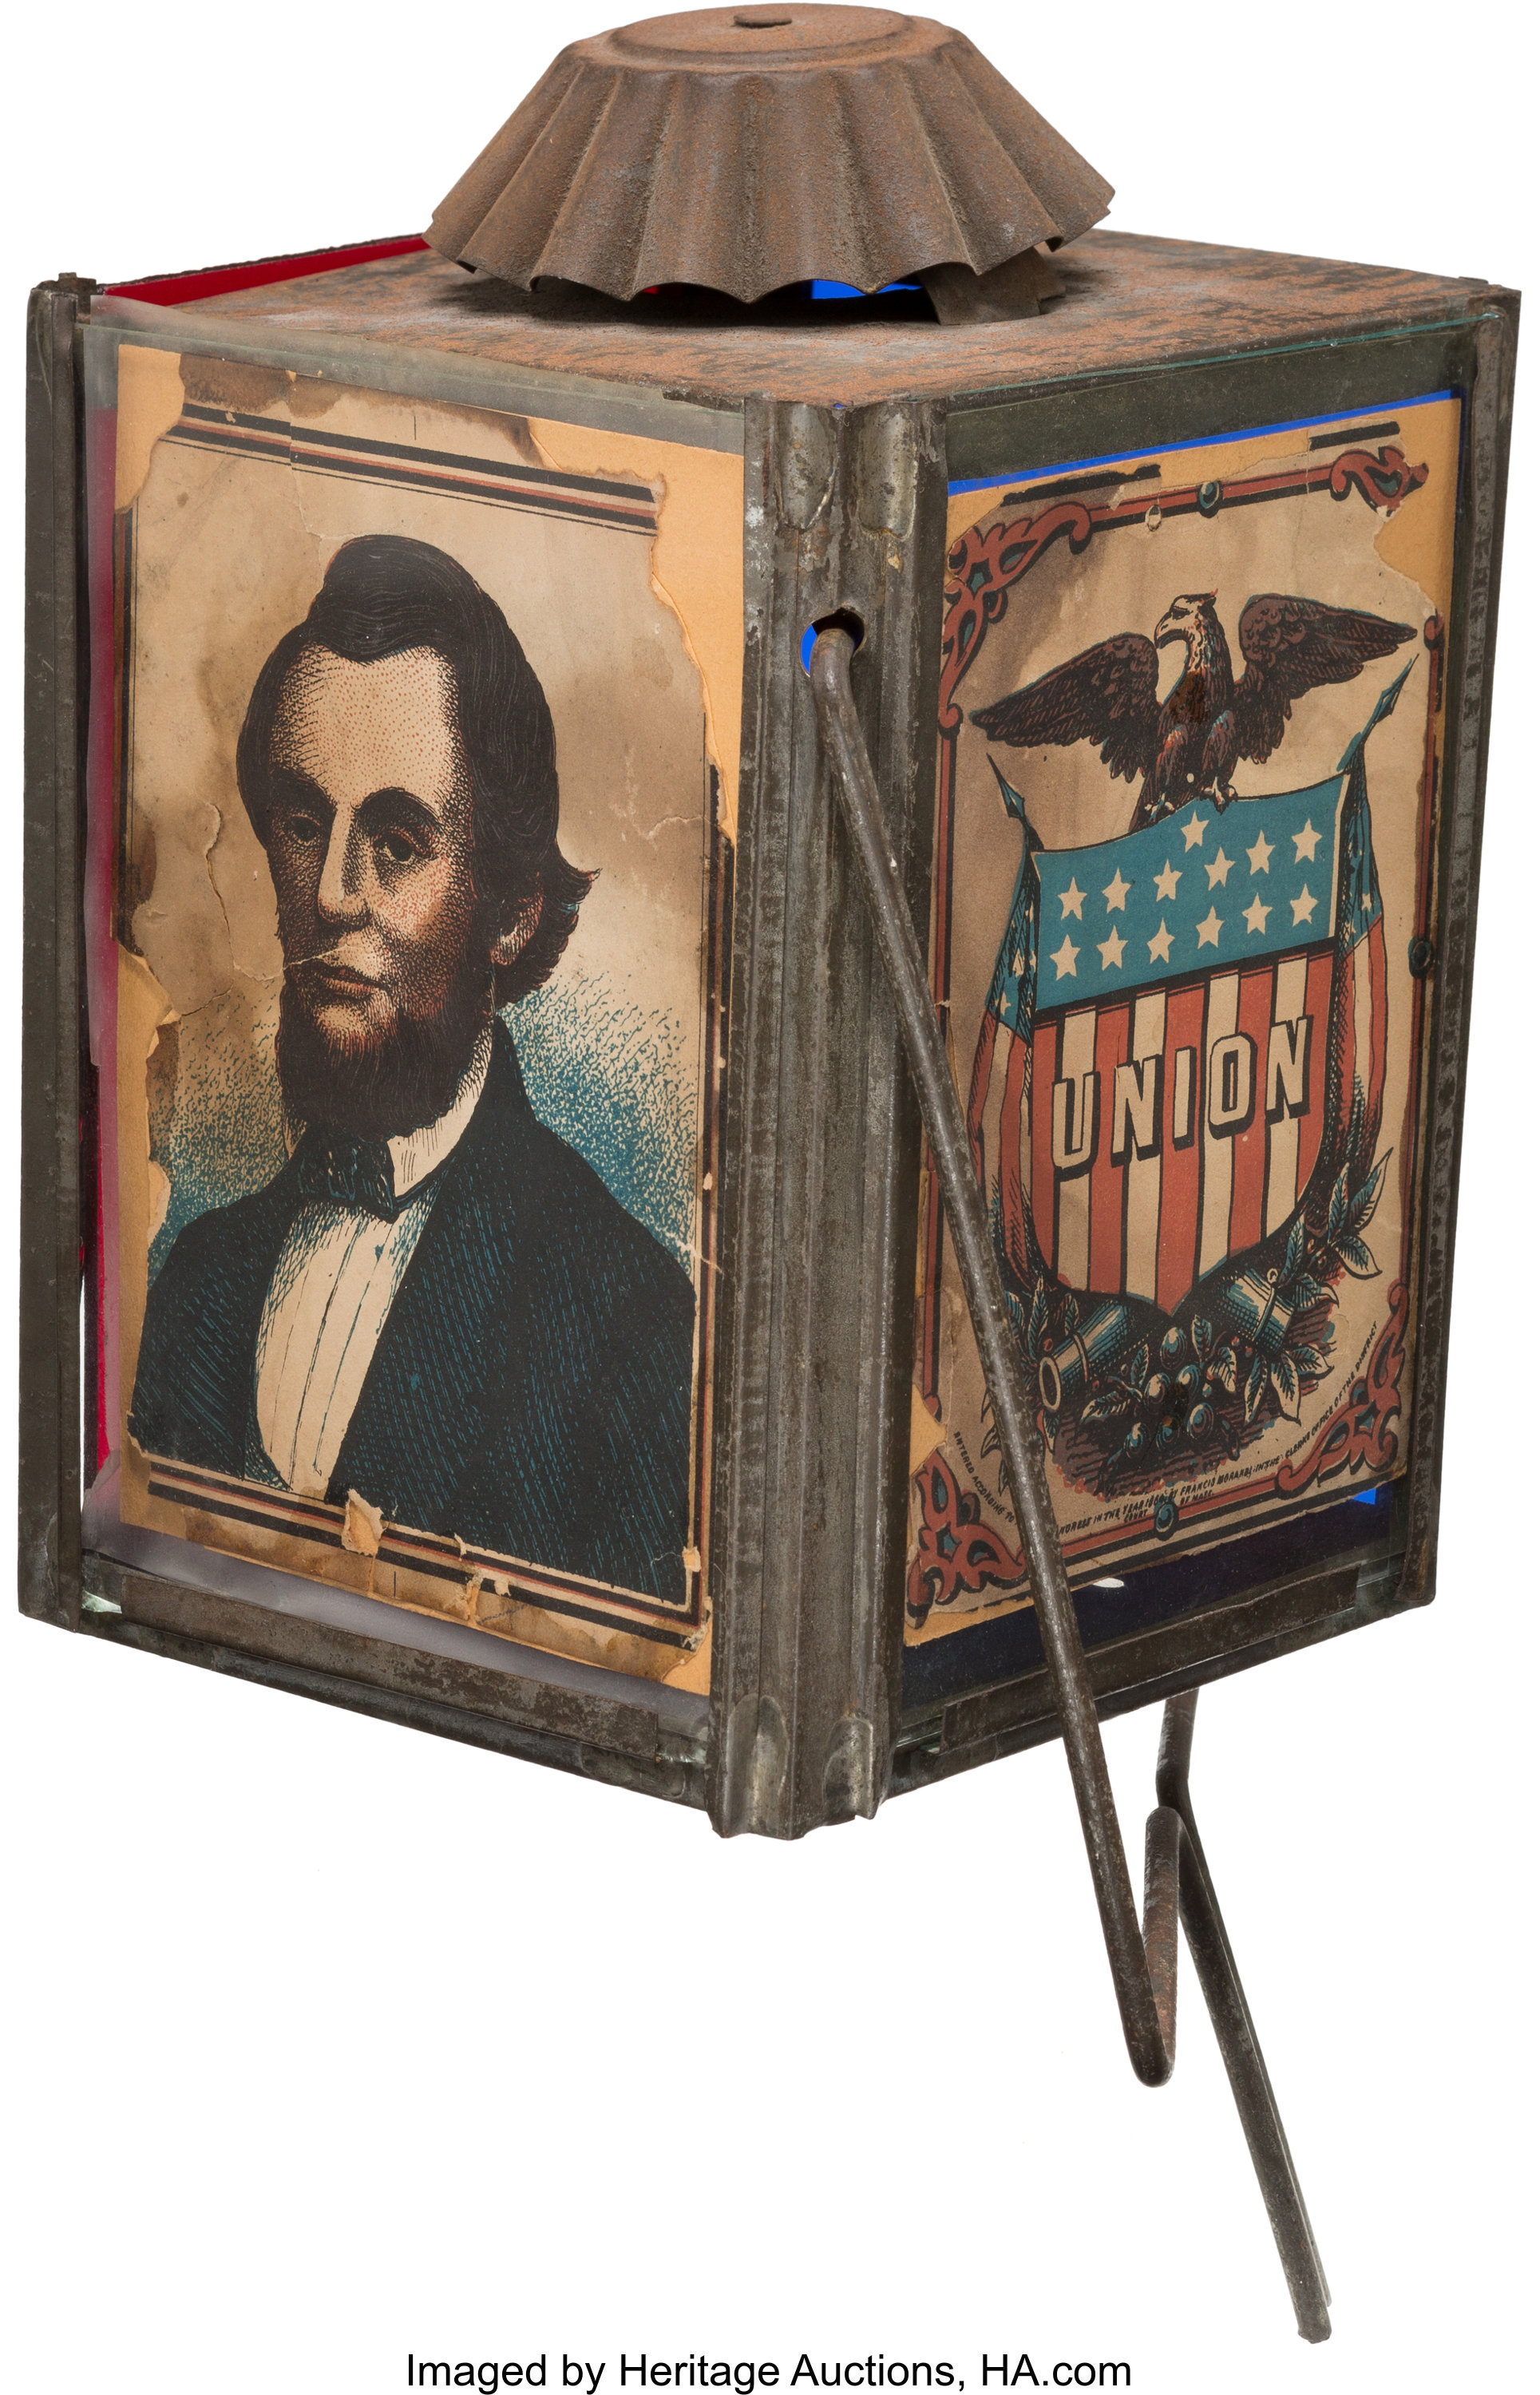 This rare circa 1860s parade lantern features an image of Abraham Lincoln on one panel and a spread-winged eagle sitting on a shield with the word "union" on it.